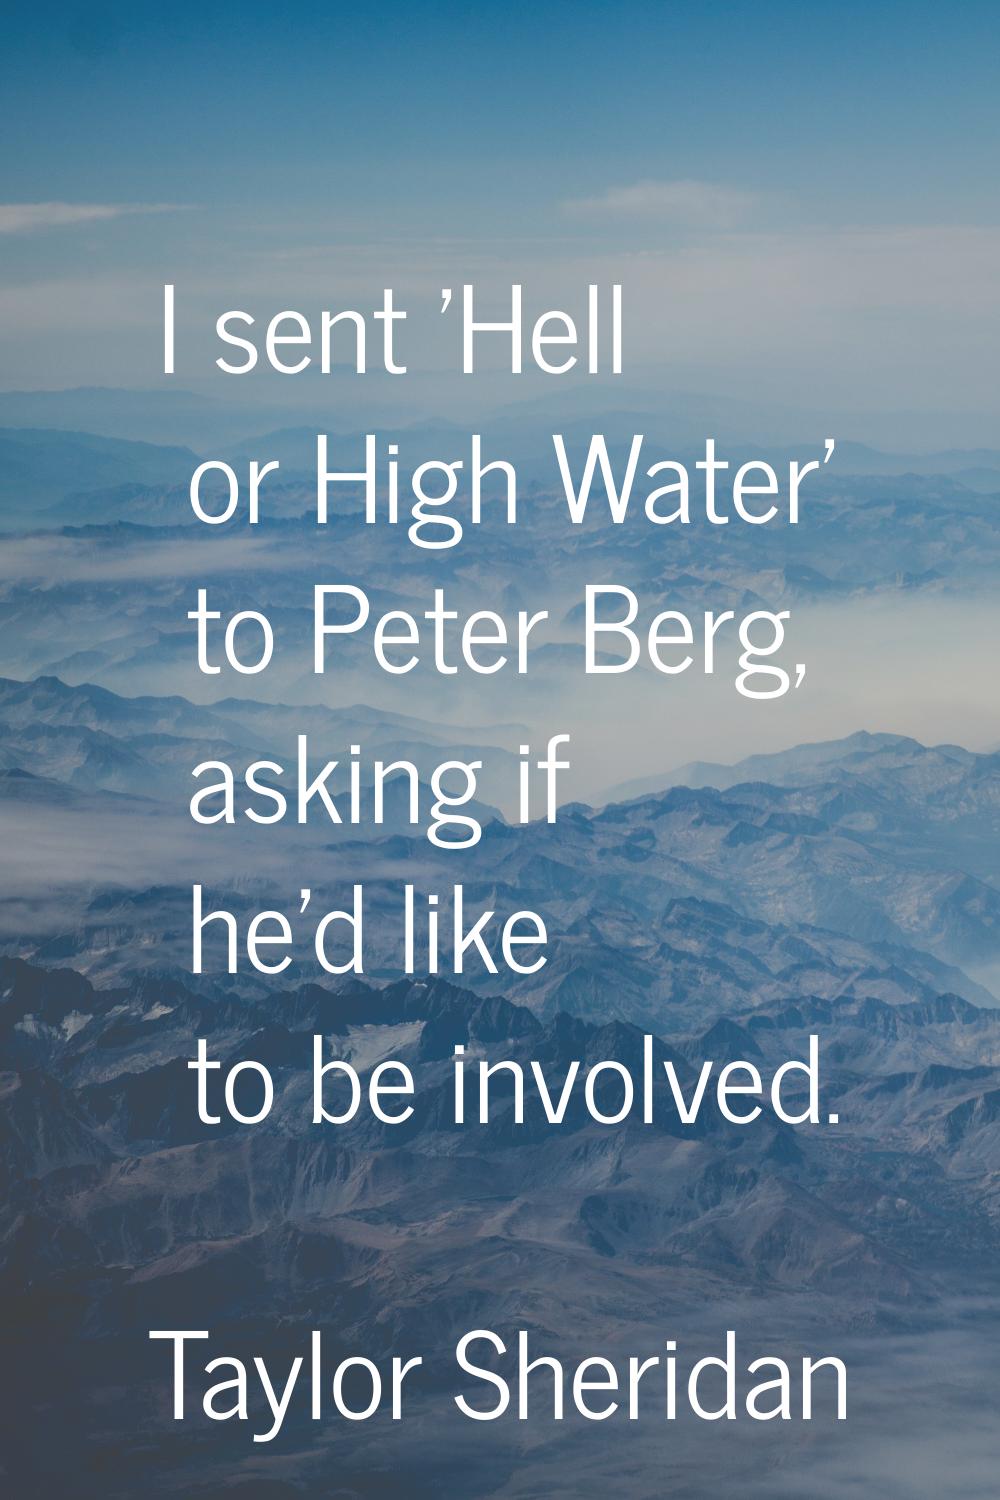 I sent 'Hell or High Water' to Peter Berg, asking if he'd like to be involved.